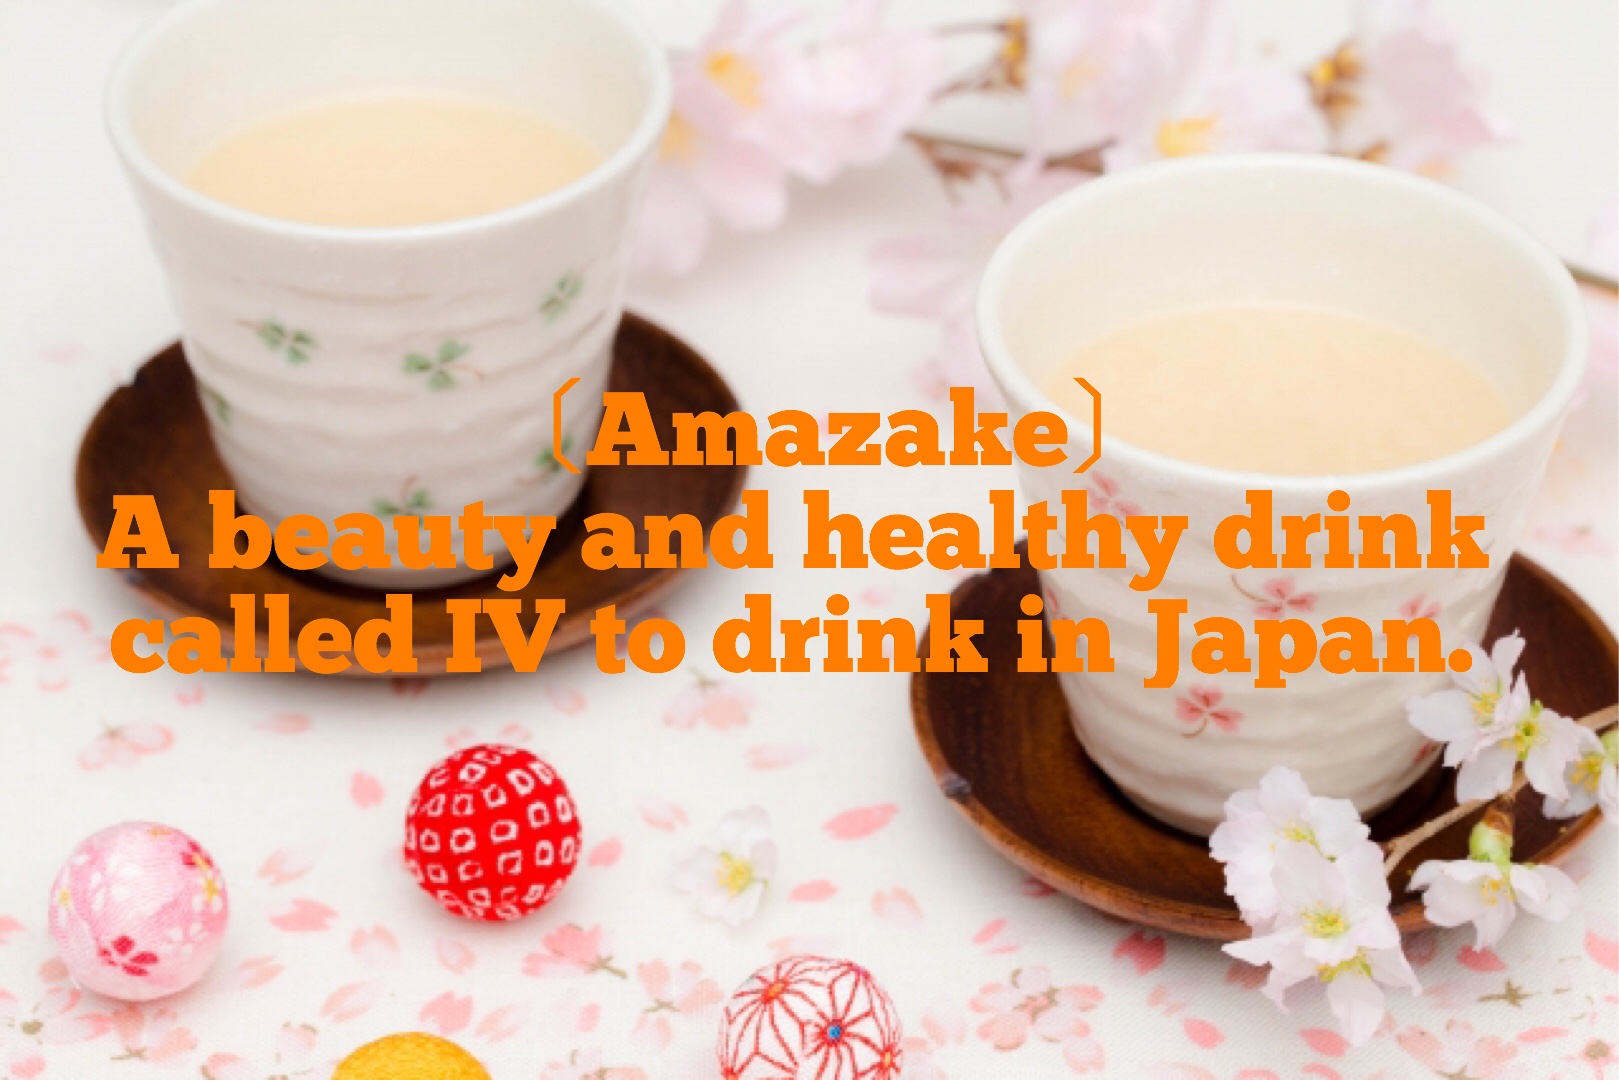 ●Can you drink Amazake? A beauty and healthy drink called“IV to drink” in Japan.